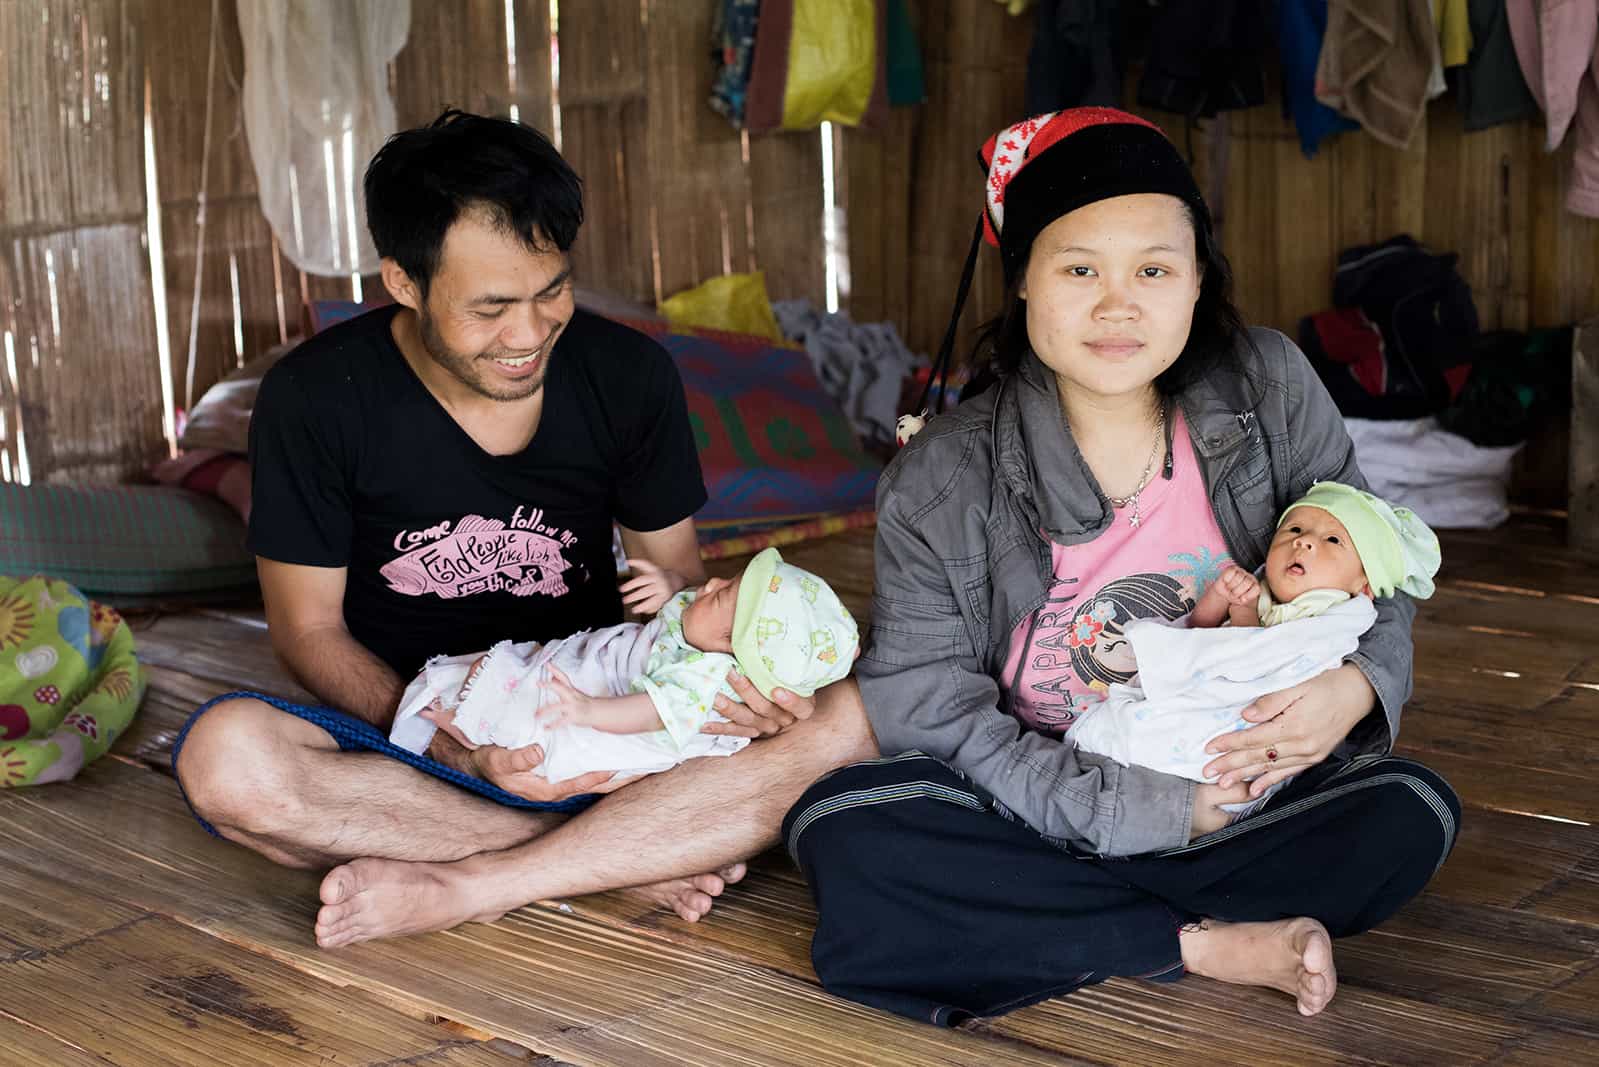 NoeDeMoo, Papala, and their twin baby girls, Phakaporn and Phakamon, sitting on the floor in their house. Papala is looking down at one of the twins smiling, and NoeDeMoo is looking at the camera.